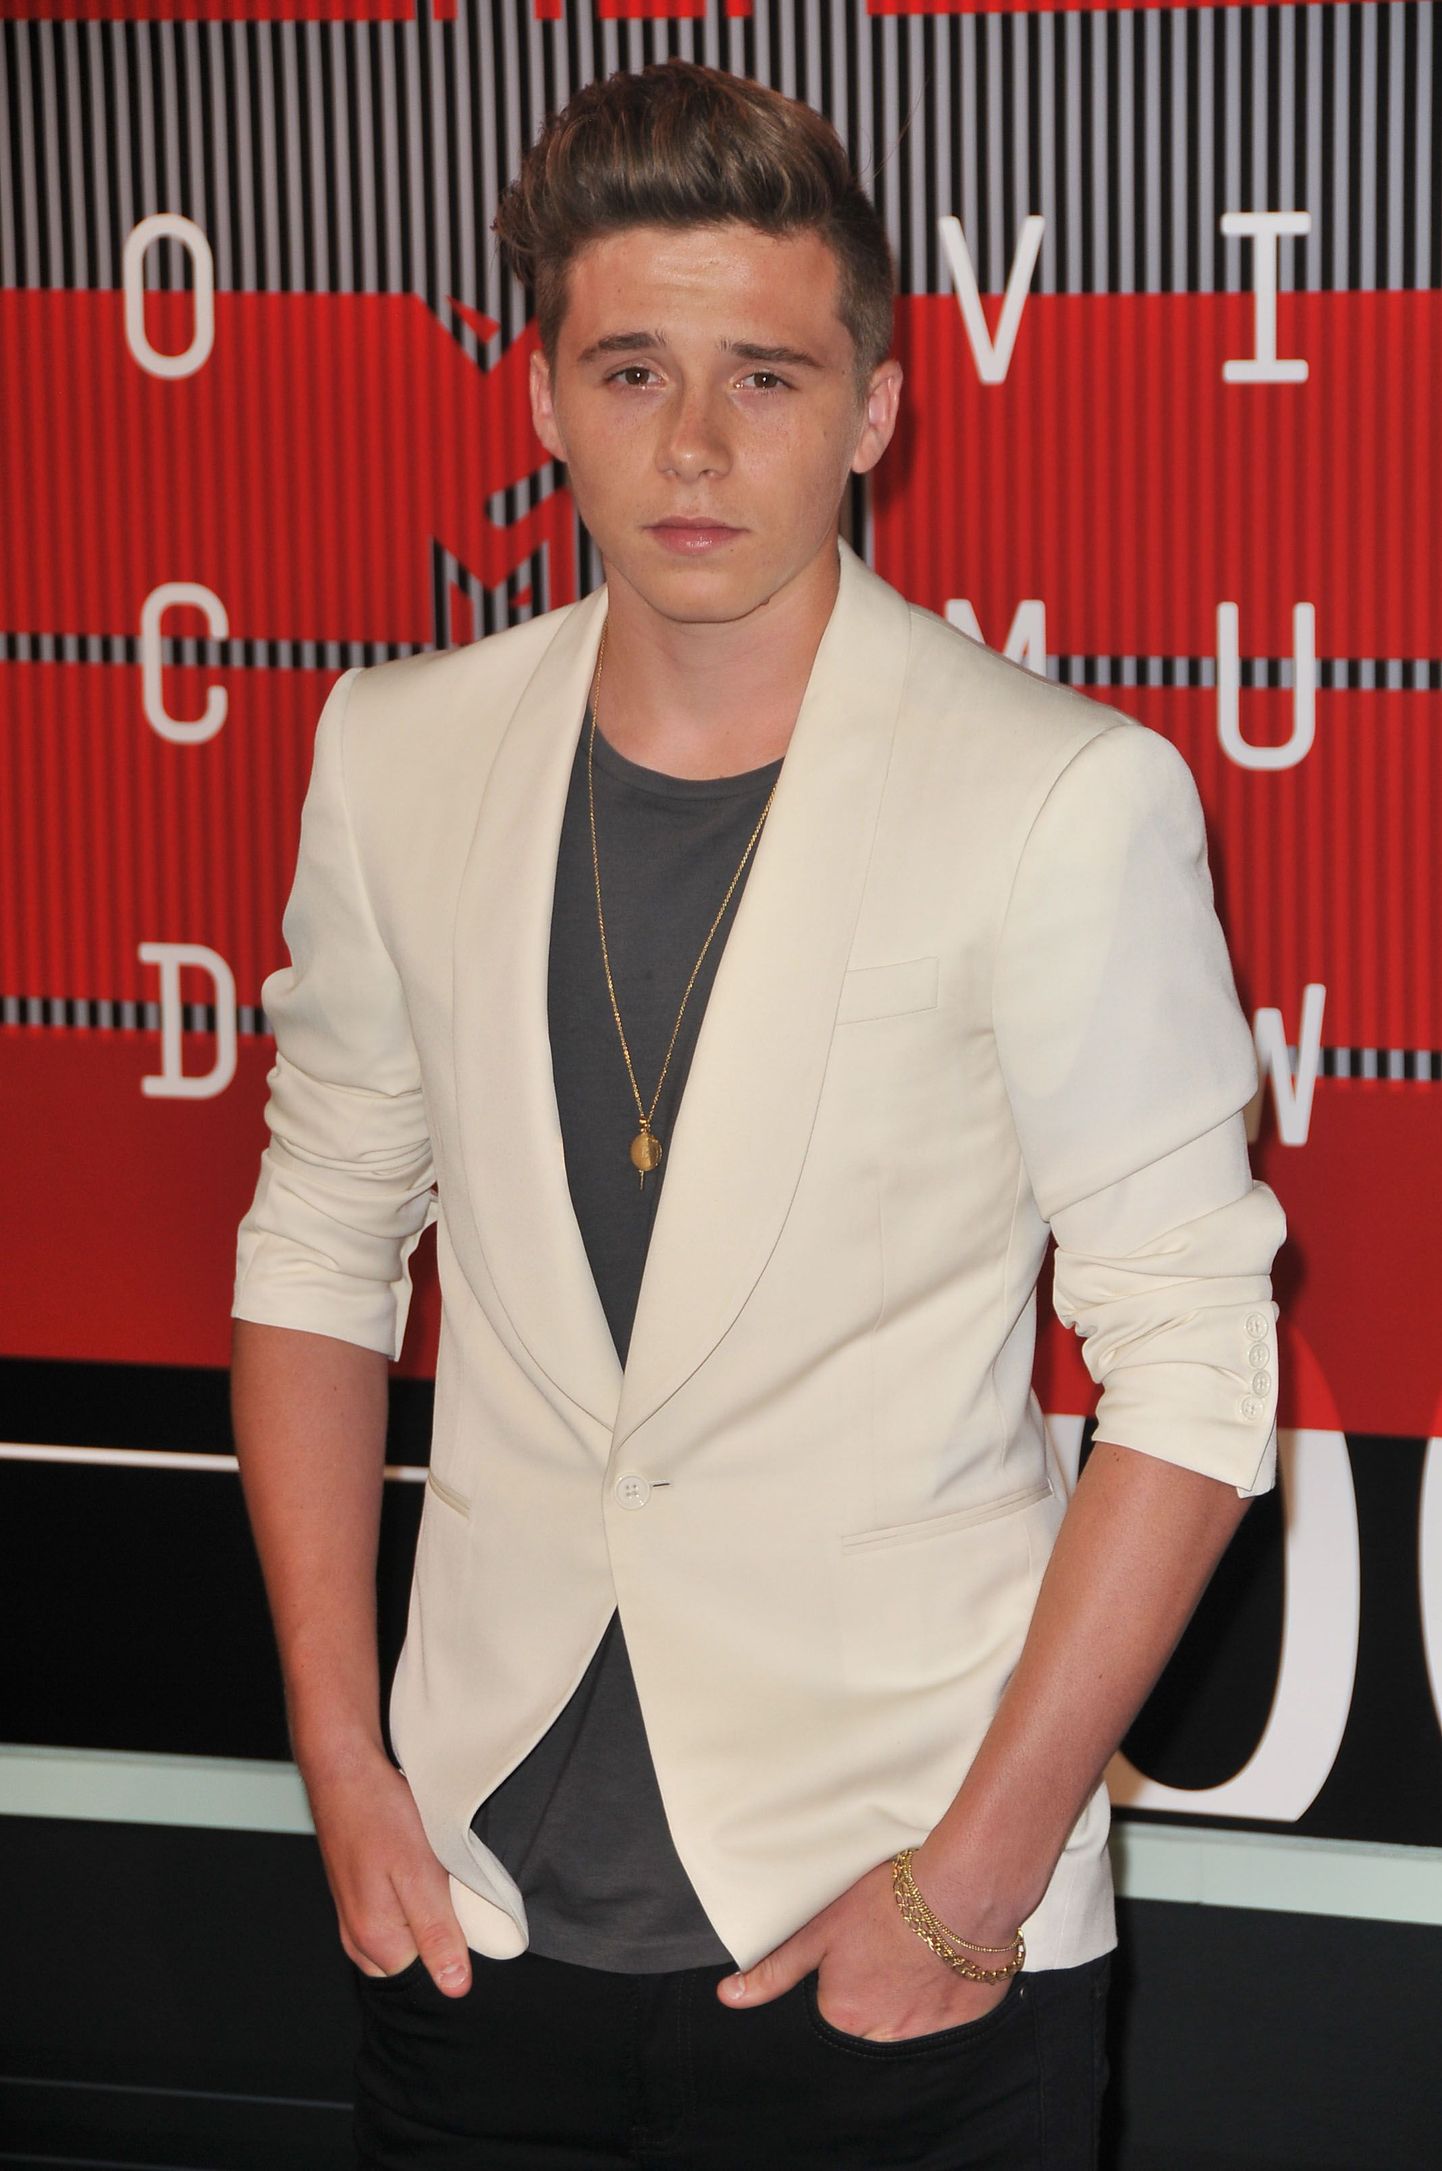 Brooklyn Beckham arrives at the 2015 MTV Video Music Awards held at Microsoft Theater in Los Angeles, CA on August 30, 2015. Photo by: Sthanlee B. Mirador  *** Please Use Credit from Credit Field ***